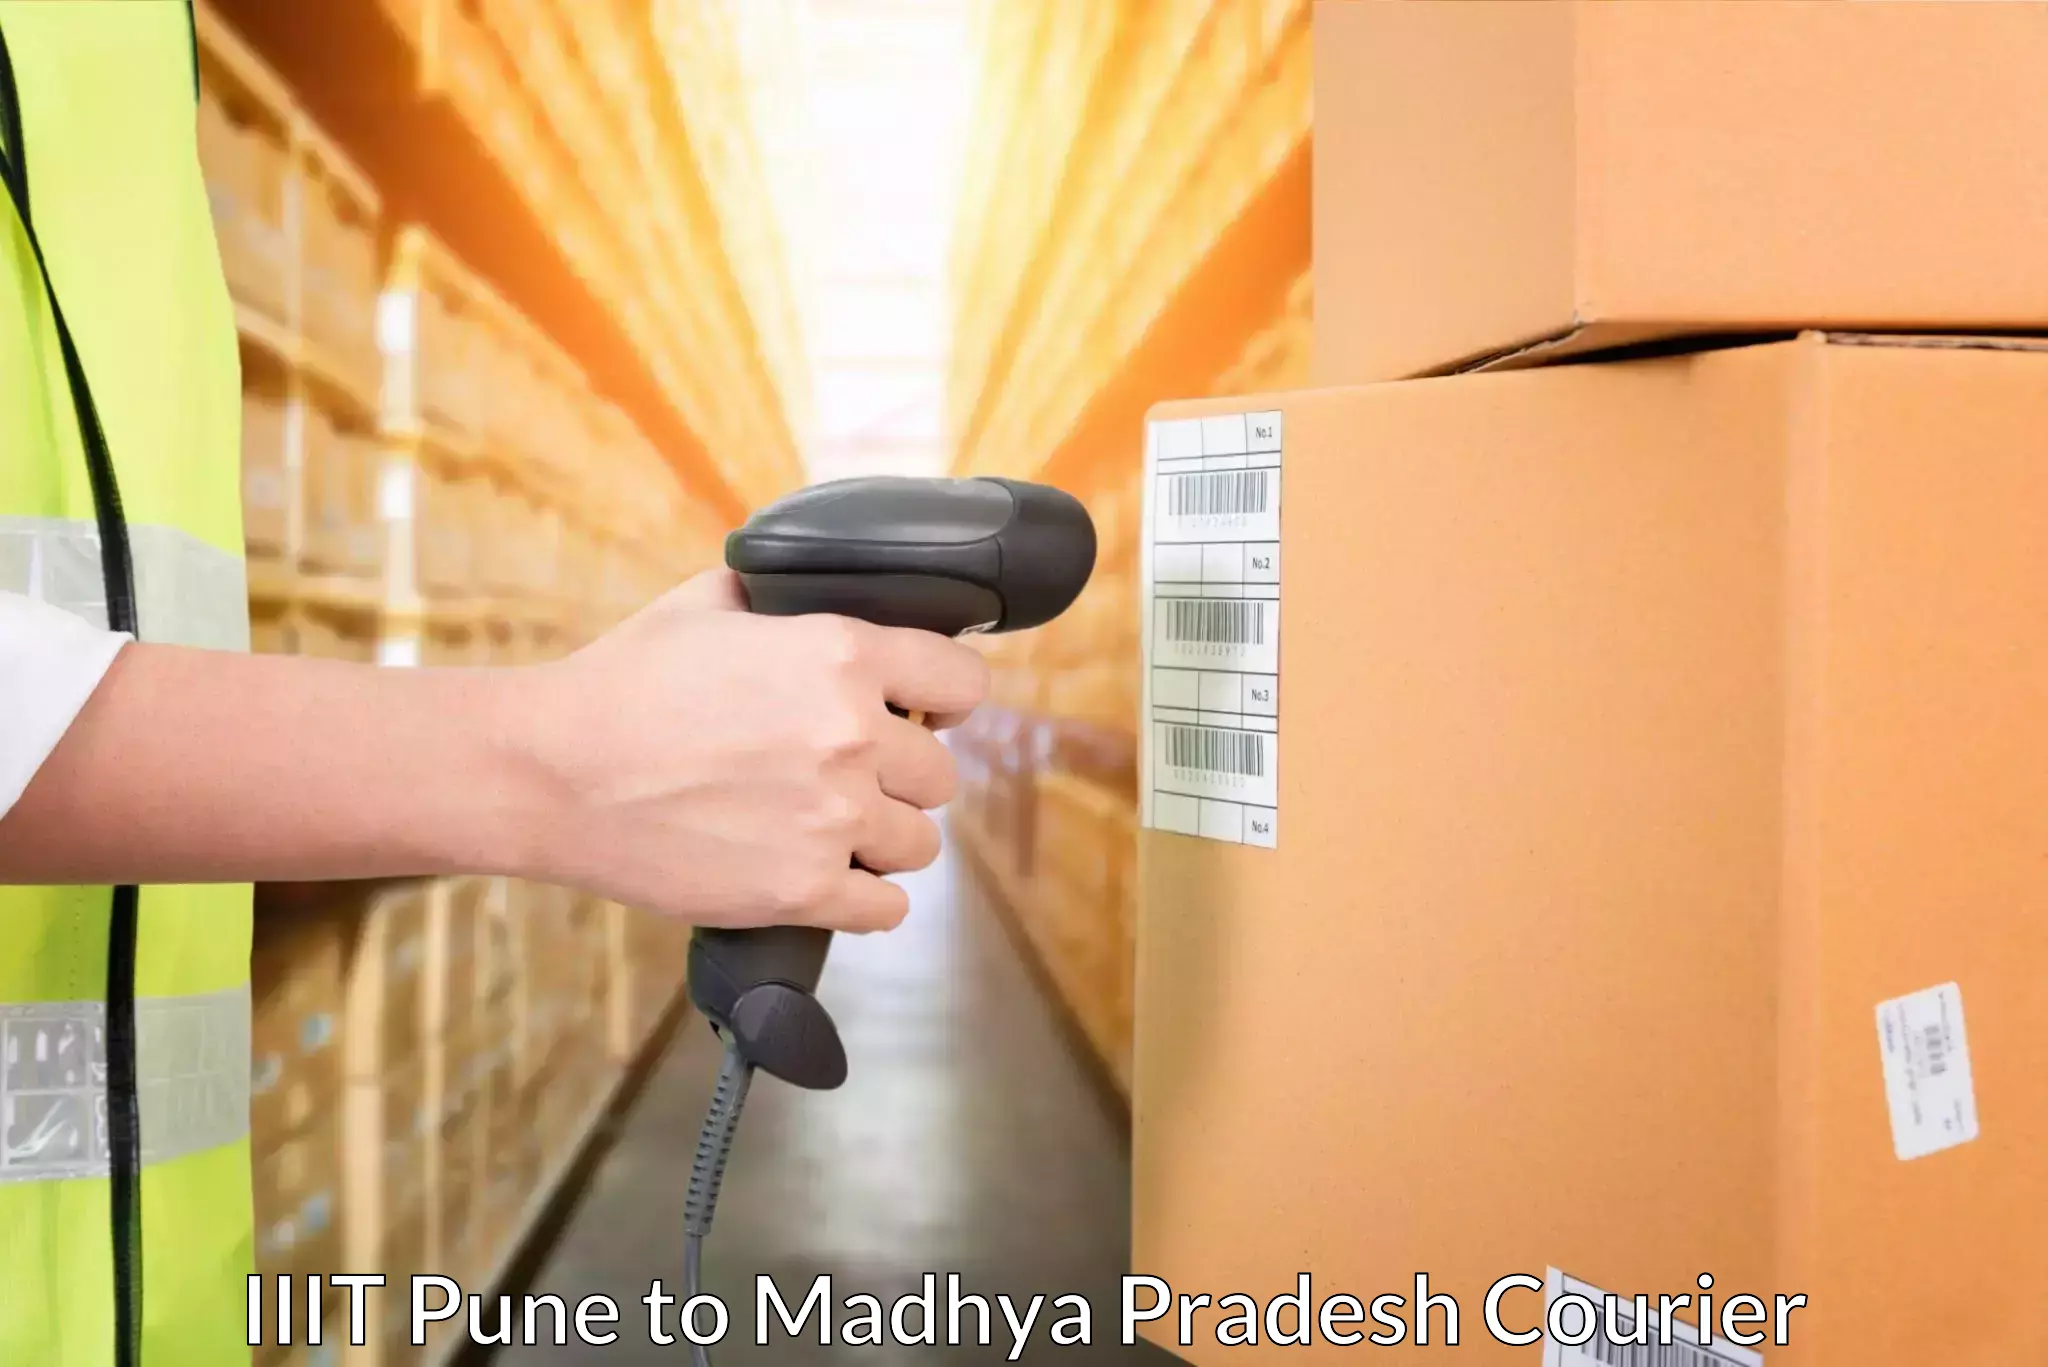 Express shipping in IIIT Pune to Chand Chaurai